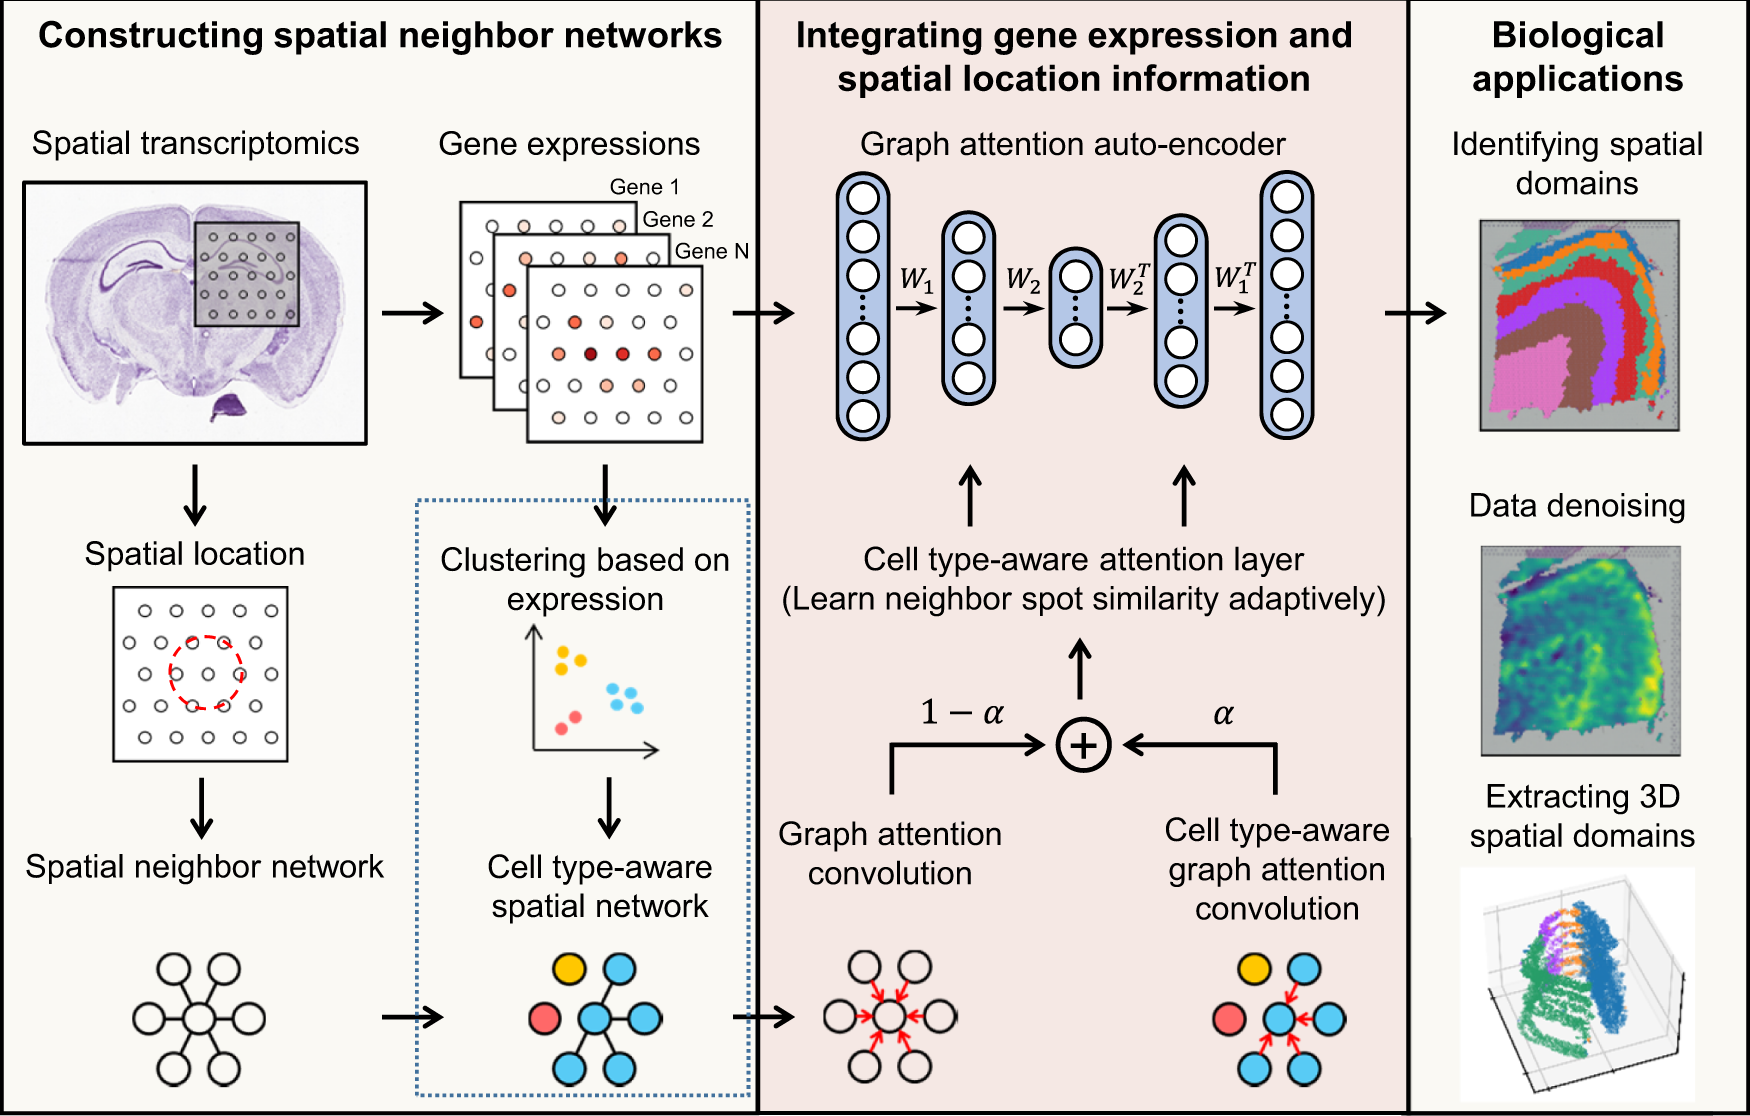 Deciphering spatial domains from spatially resolved transcriptomics with an  adaptive graph attention auto-encoder | Nature Communications